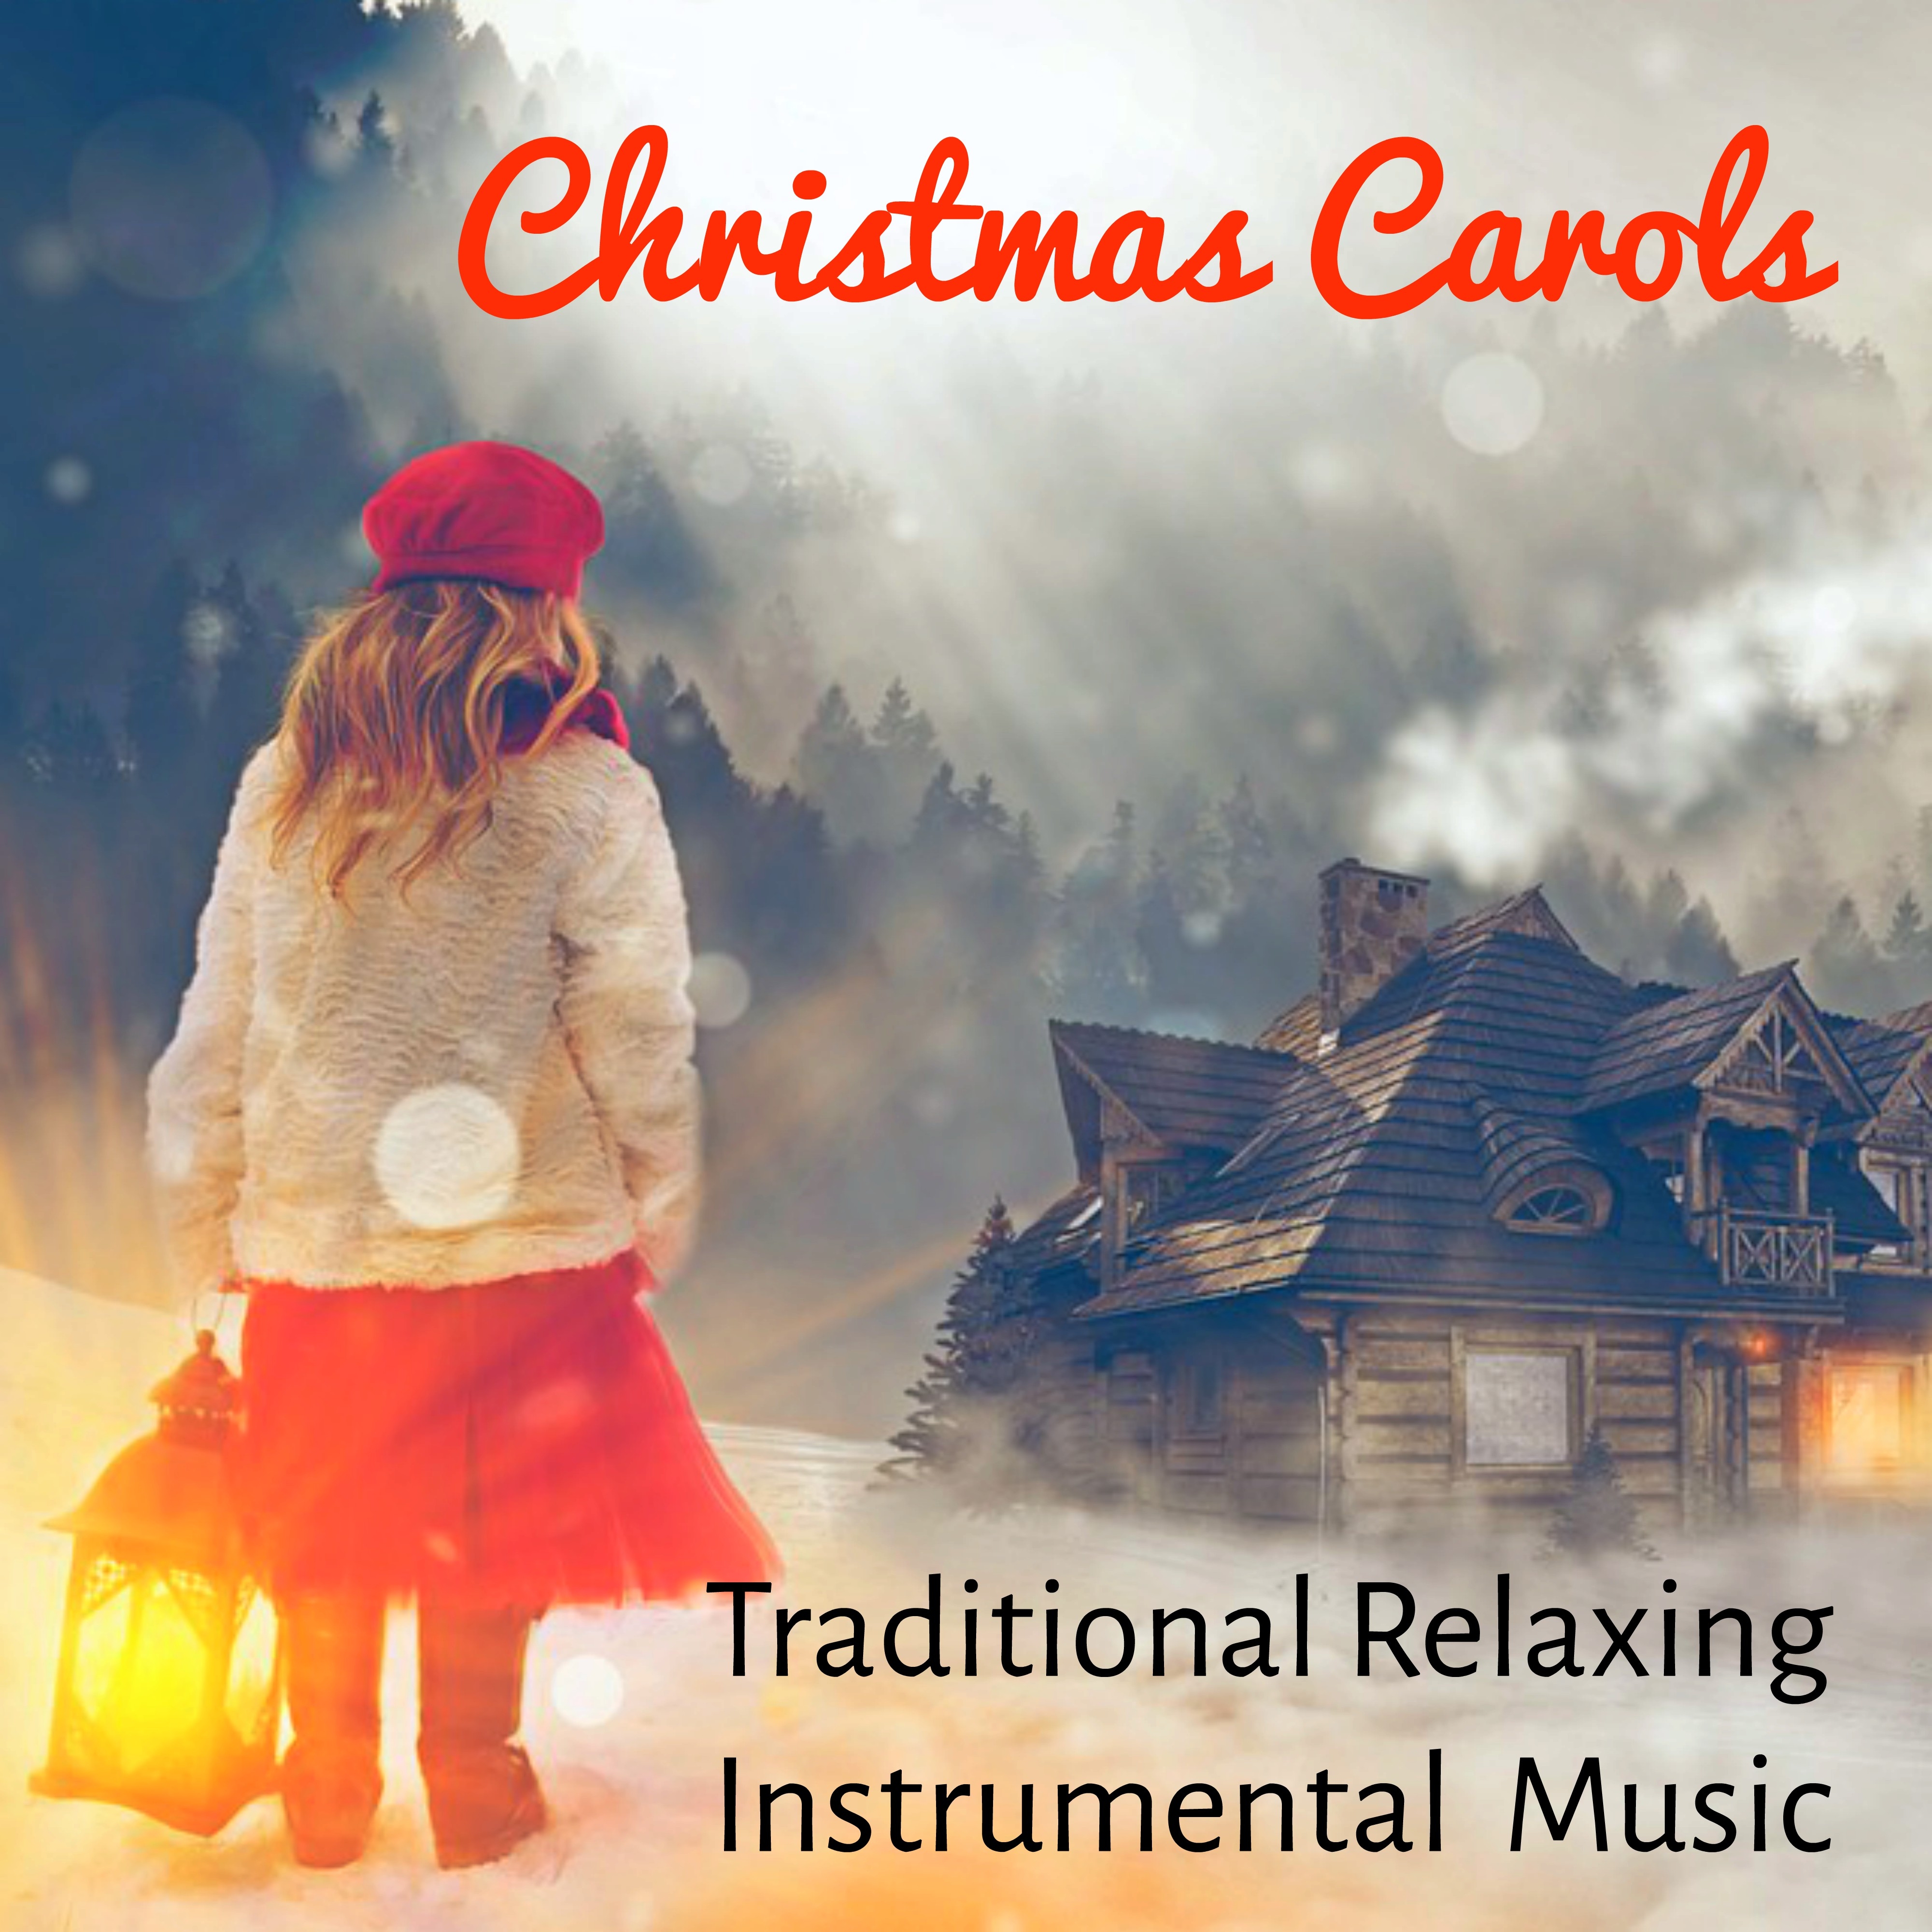 Christmas Carols - Traditional Instrumental Relaxing Music for Beautiful Day Silent Night Chakra Meditation with New Age Binaural Soothing Sounds